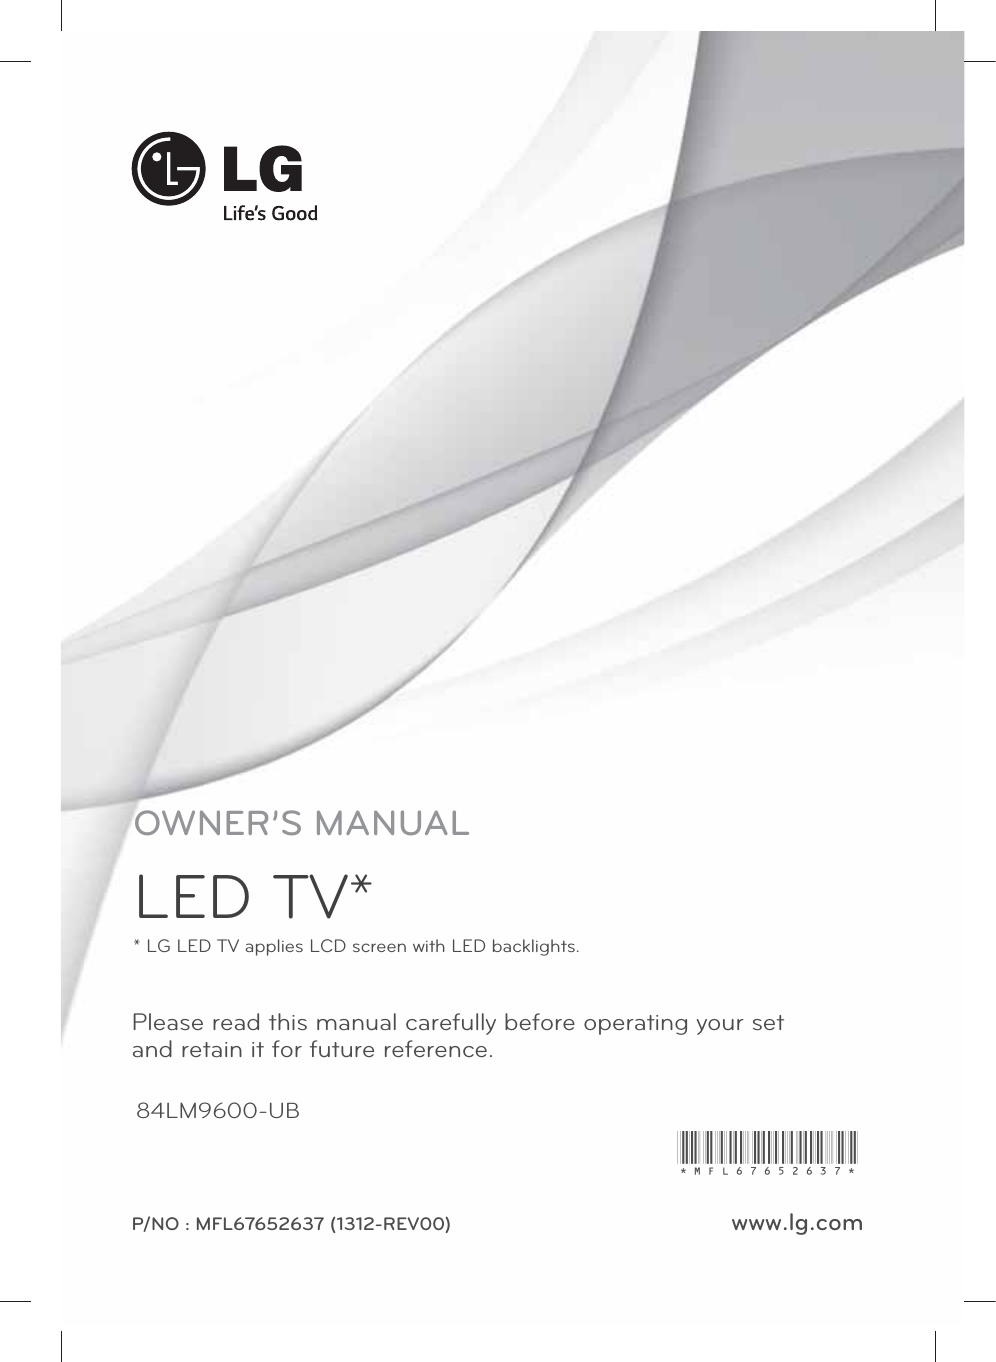 www.lg.comPlease read this manual carefully before operating your set and retain it for future reference.OWNER’S MANUALLED TV** LG LED TV applies LCD screen with LED backlights.84LM9600-UBP/NO : MFL67652637 (1312-REV00)*MFL67652637*